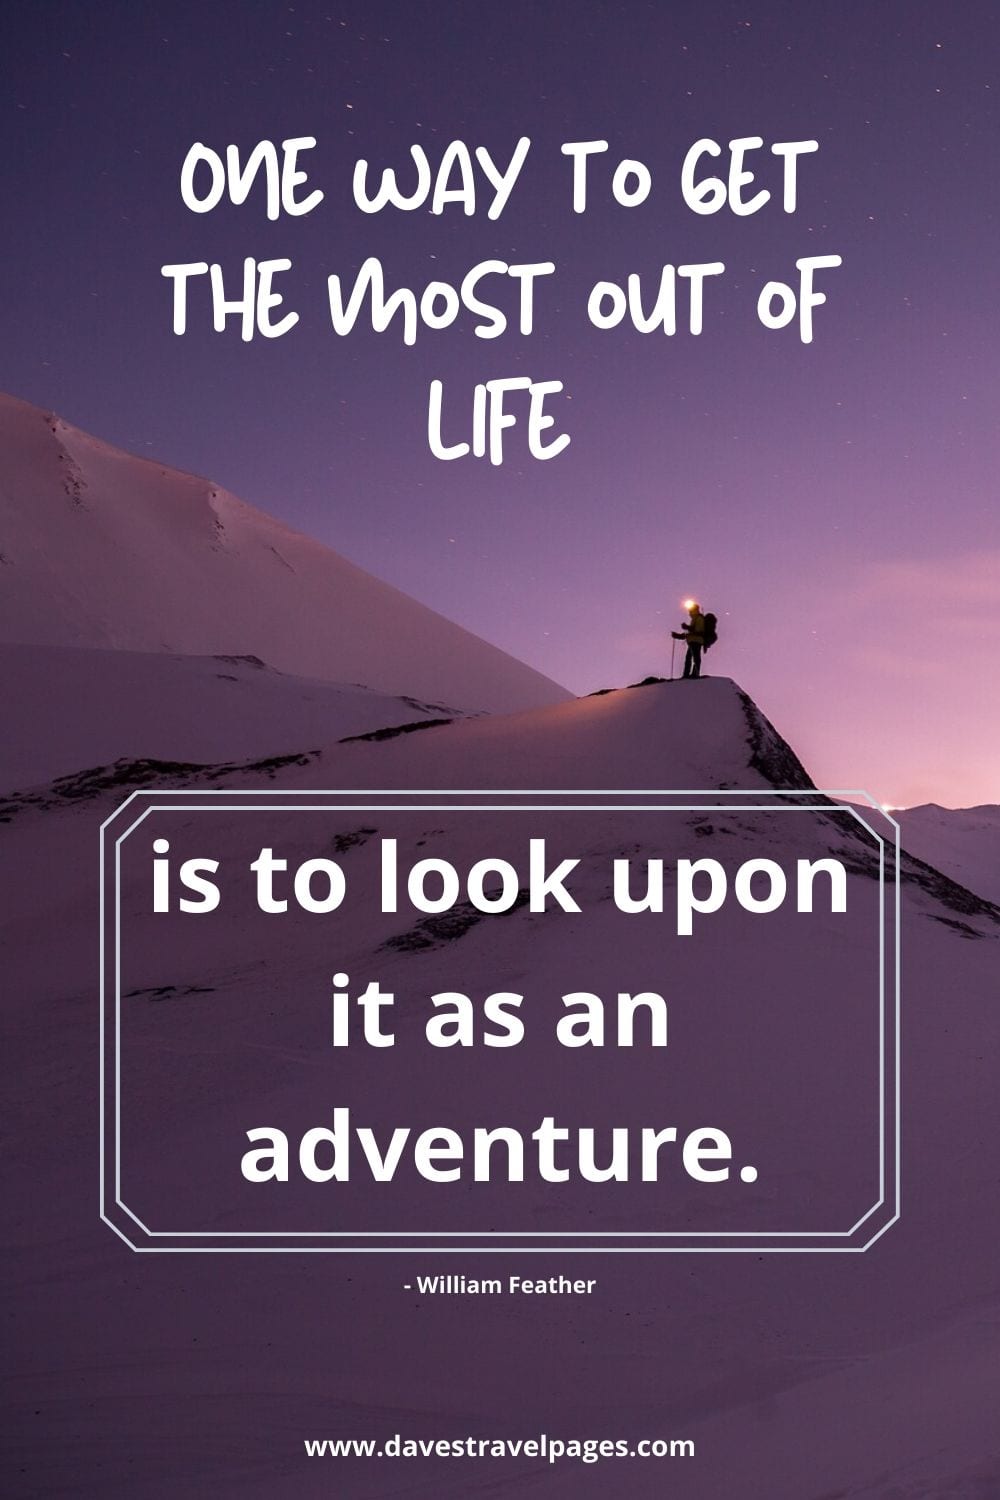 One way to get the most out of life is to look upon it as an adventure. William Feather